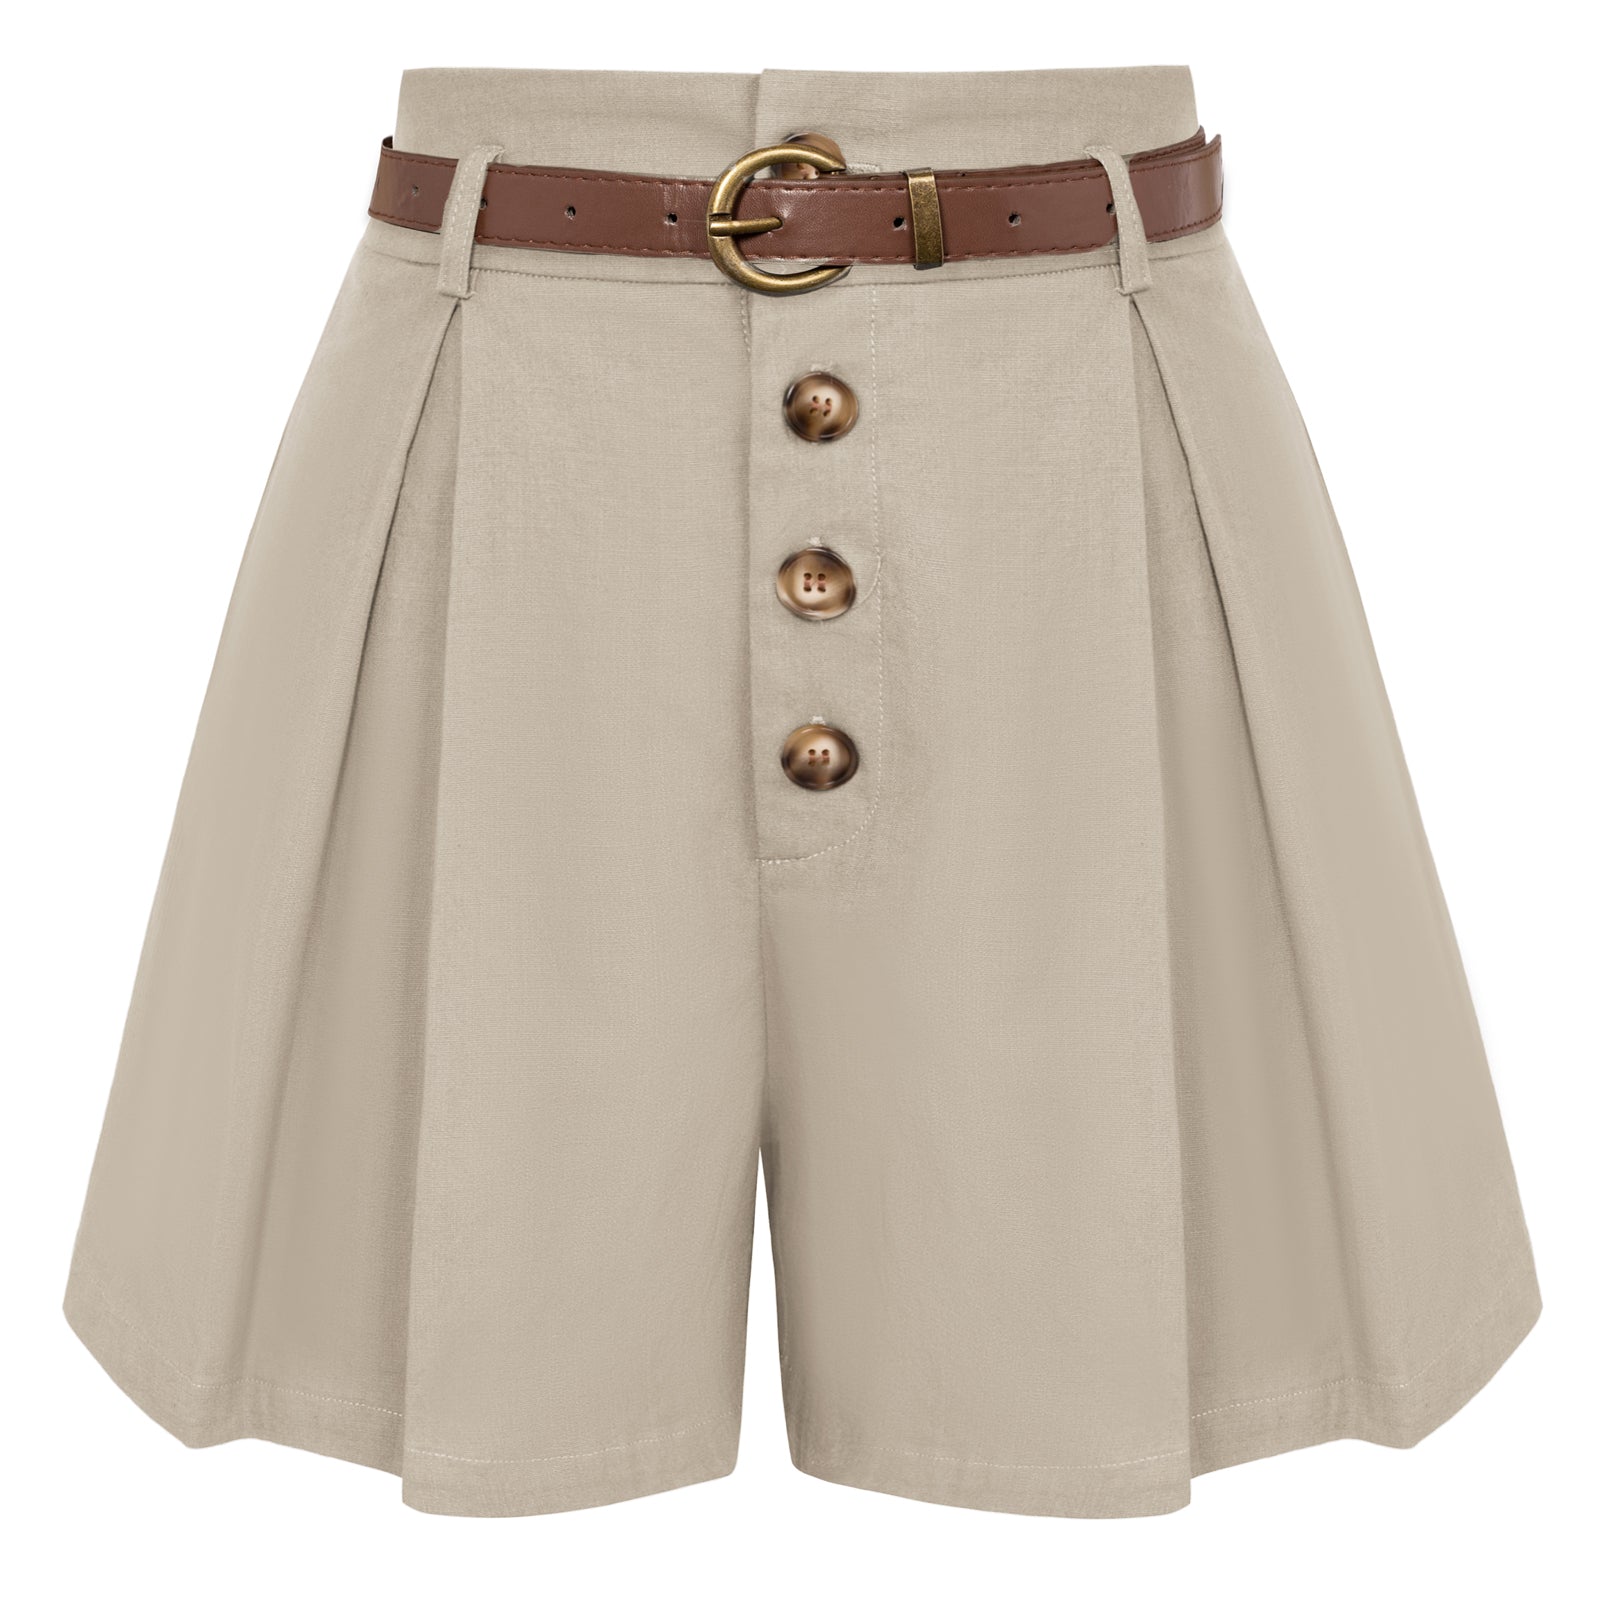 High Waisted Shorts Summer Wide Leg Shorts with Pockets and Belt Pleated Shorts Dressy Casual